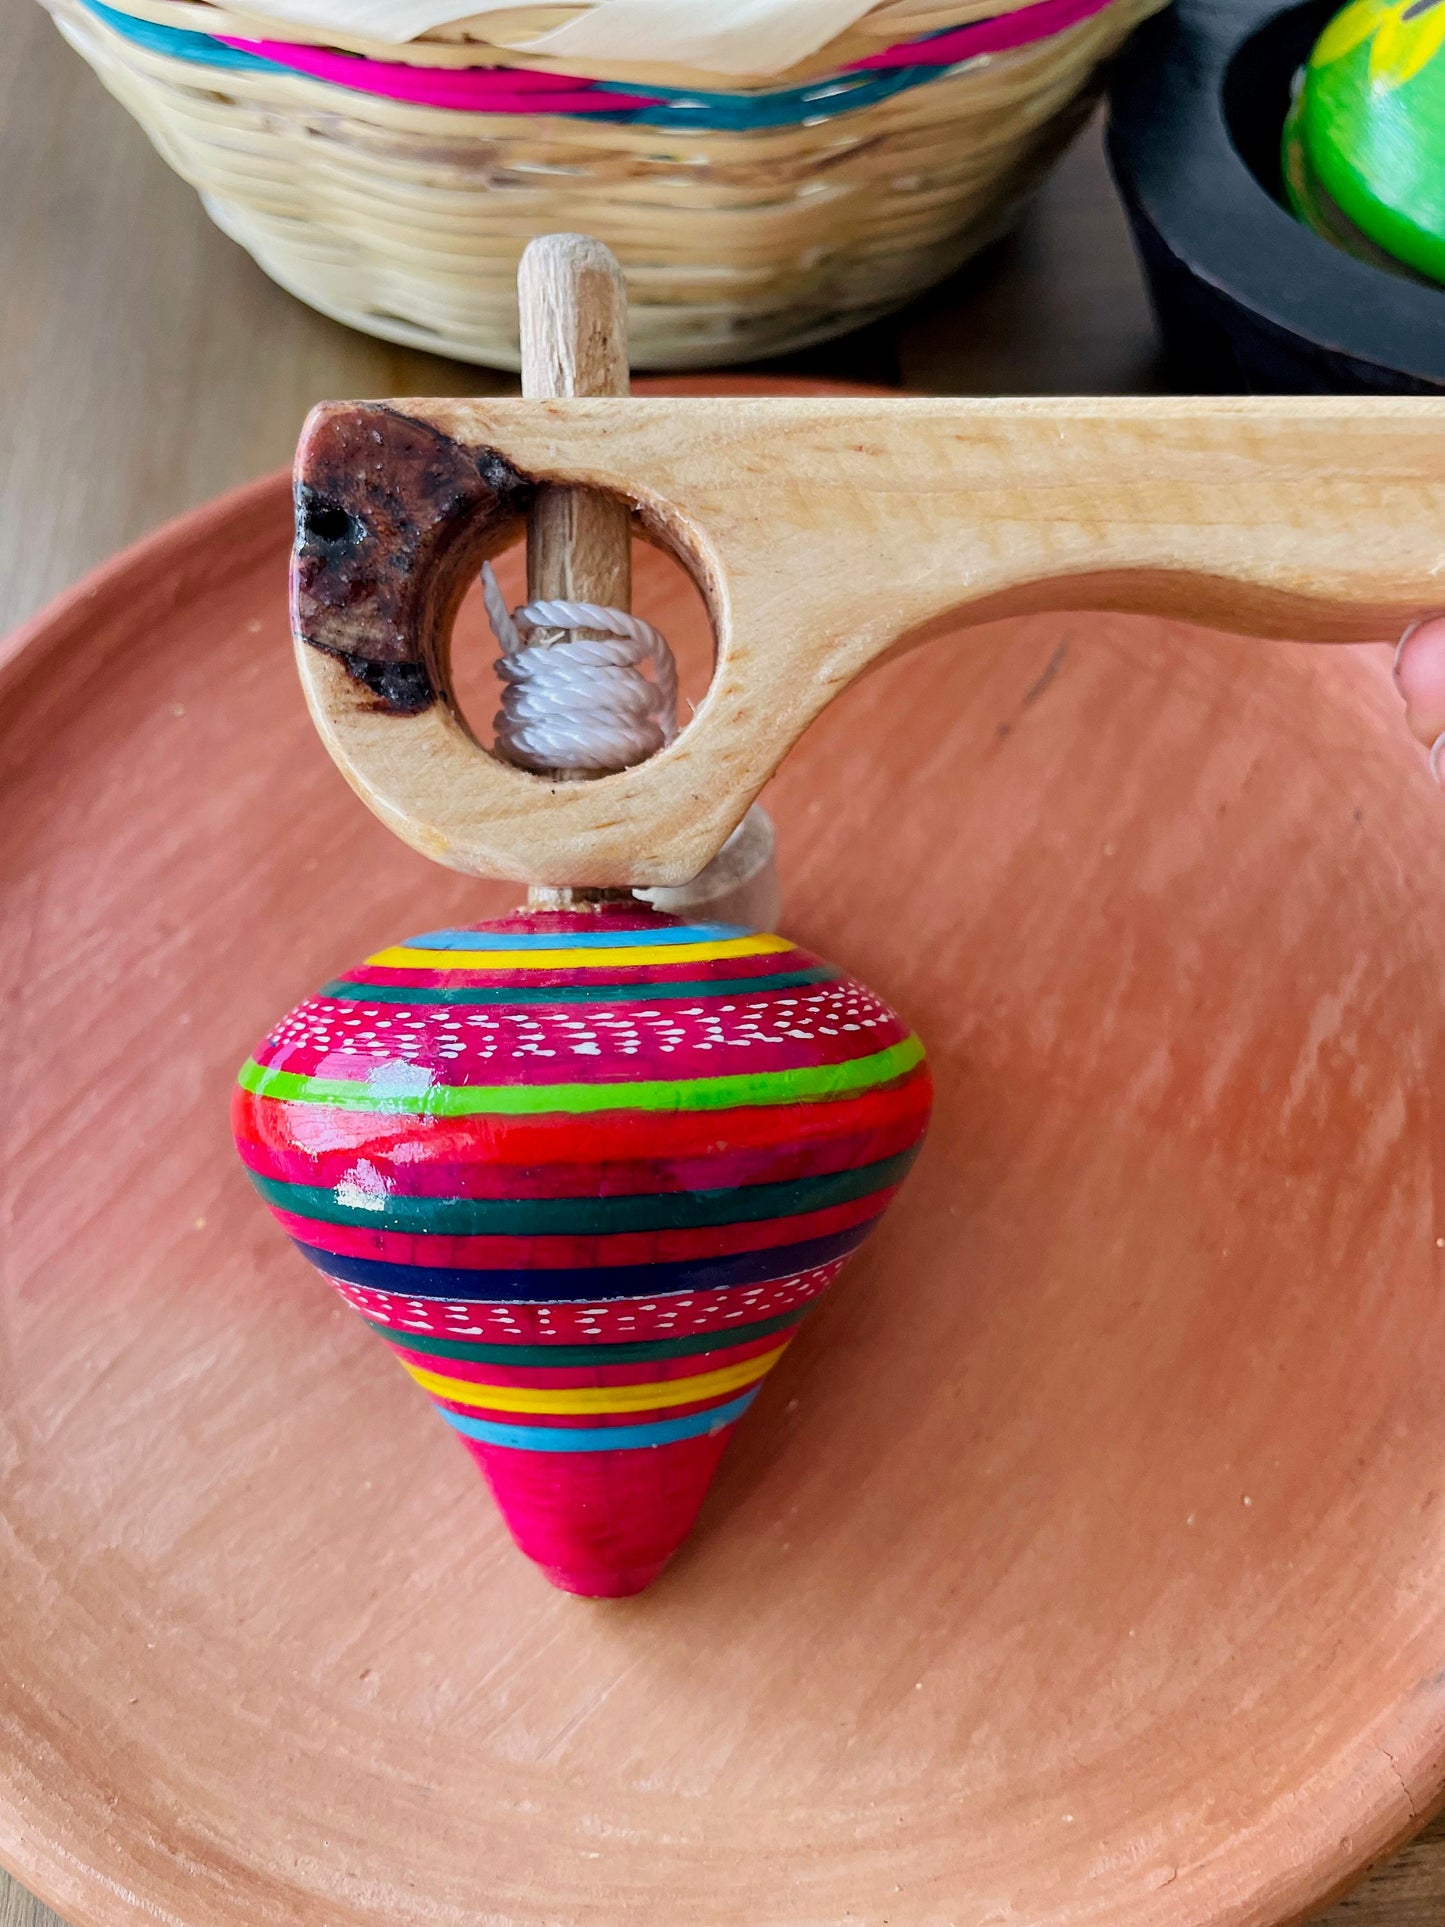 Guatemalan Traditional Spinning Wooden Top Toy- Trompo